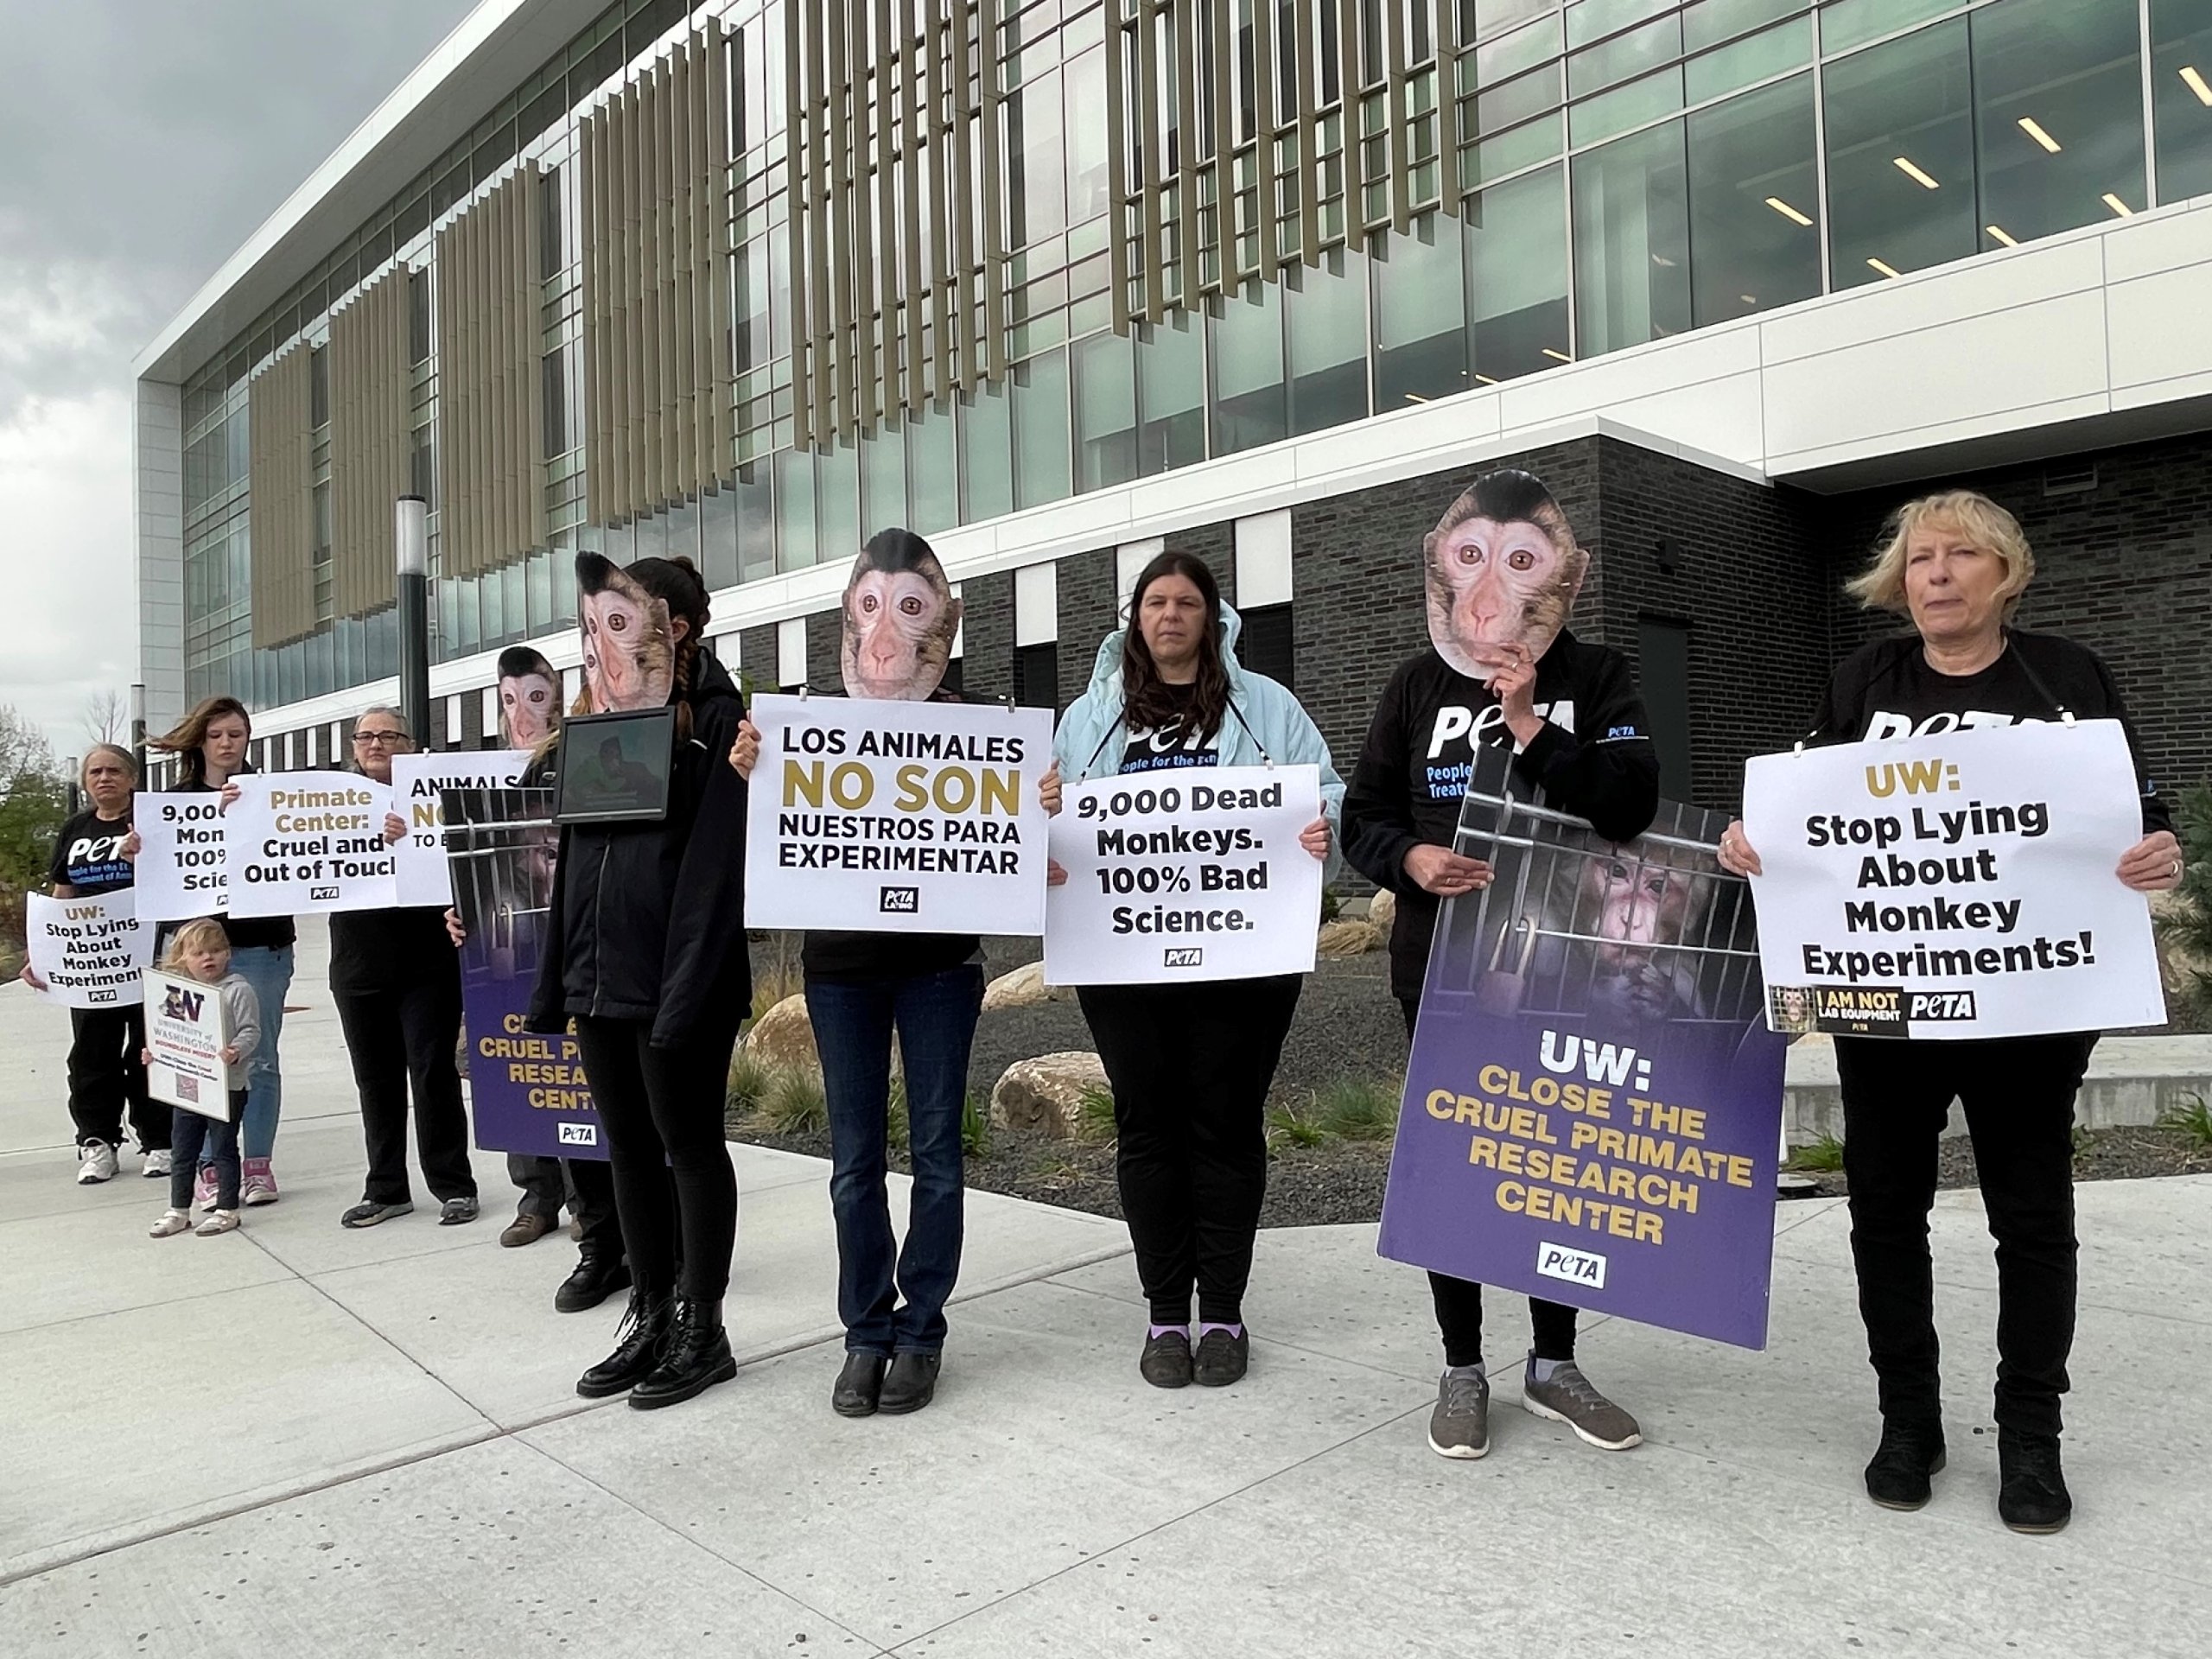 Ten demonstrators stand in a line outside of University of Washington’s health sciences center holding signs in both English and Spanish. Sign text reads: "UW: Stop Lying about Monkey Experiments!", "9,000 Dead Monkeys. 100% Bad Science", "Los Animales No Son Nuestros Para Experimentar", and "Primate Center, Cruel and Out of Touch"